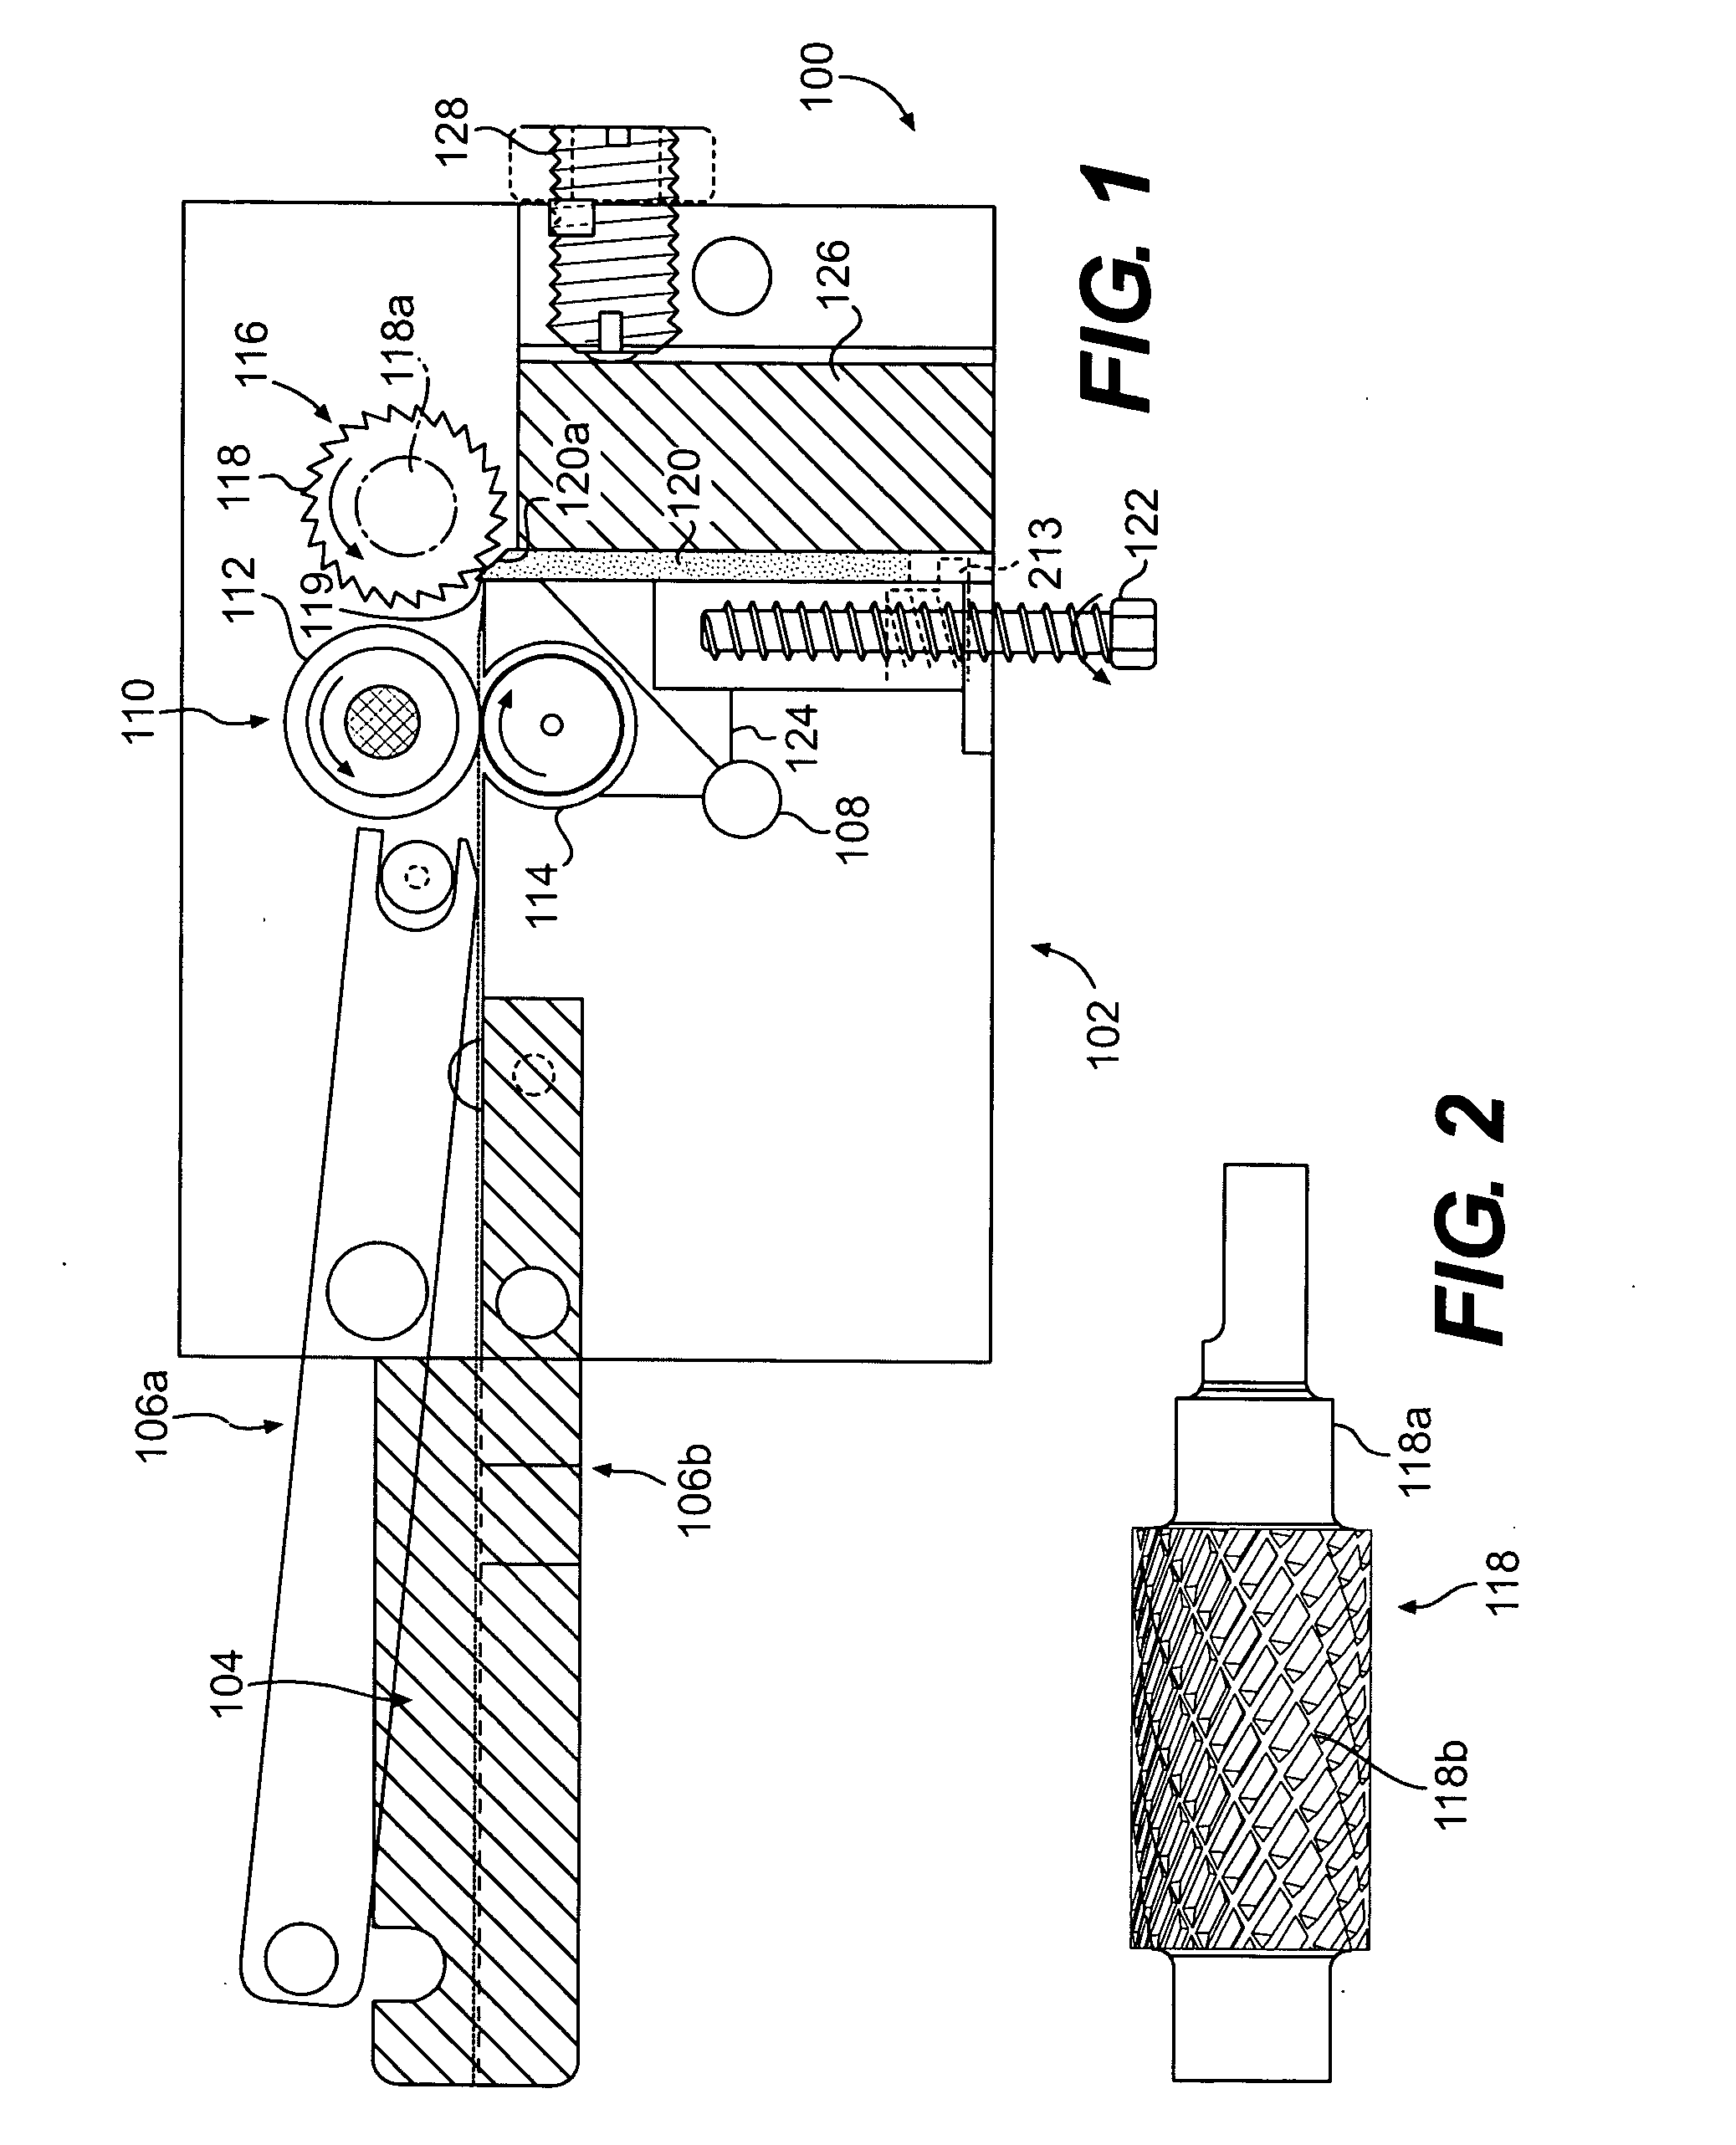 Self-healing cutting apparatus and other self-healing machinery